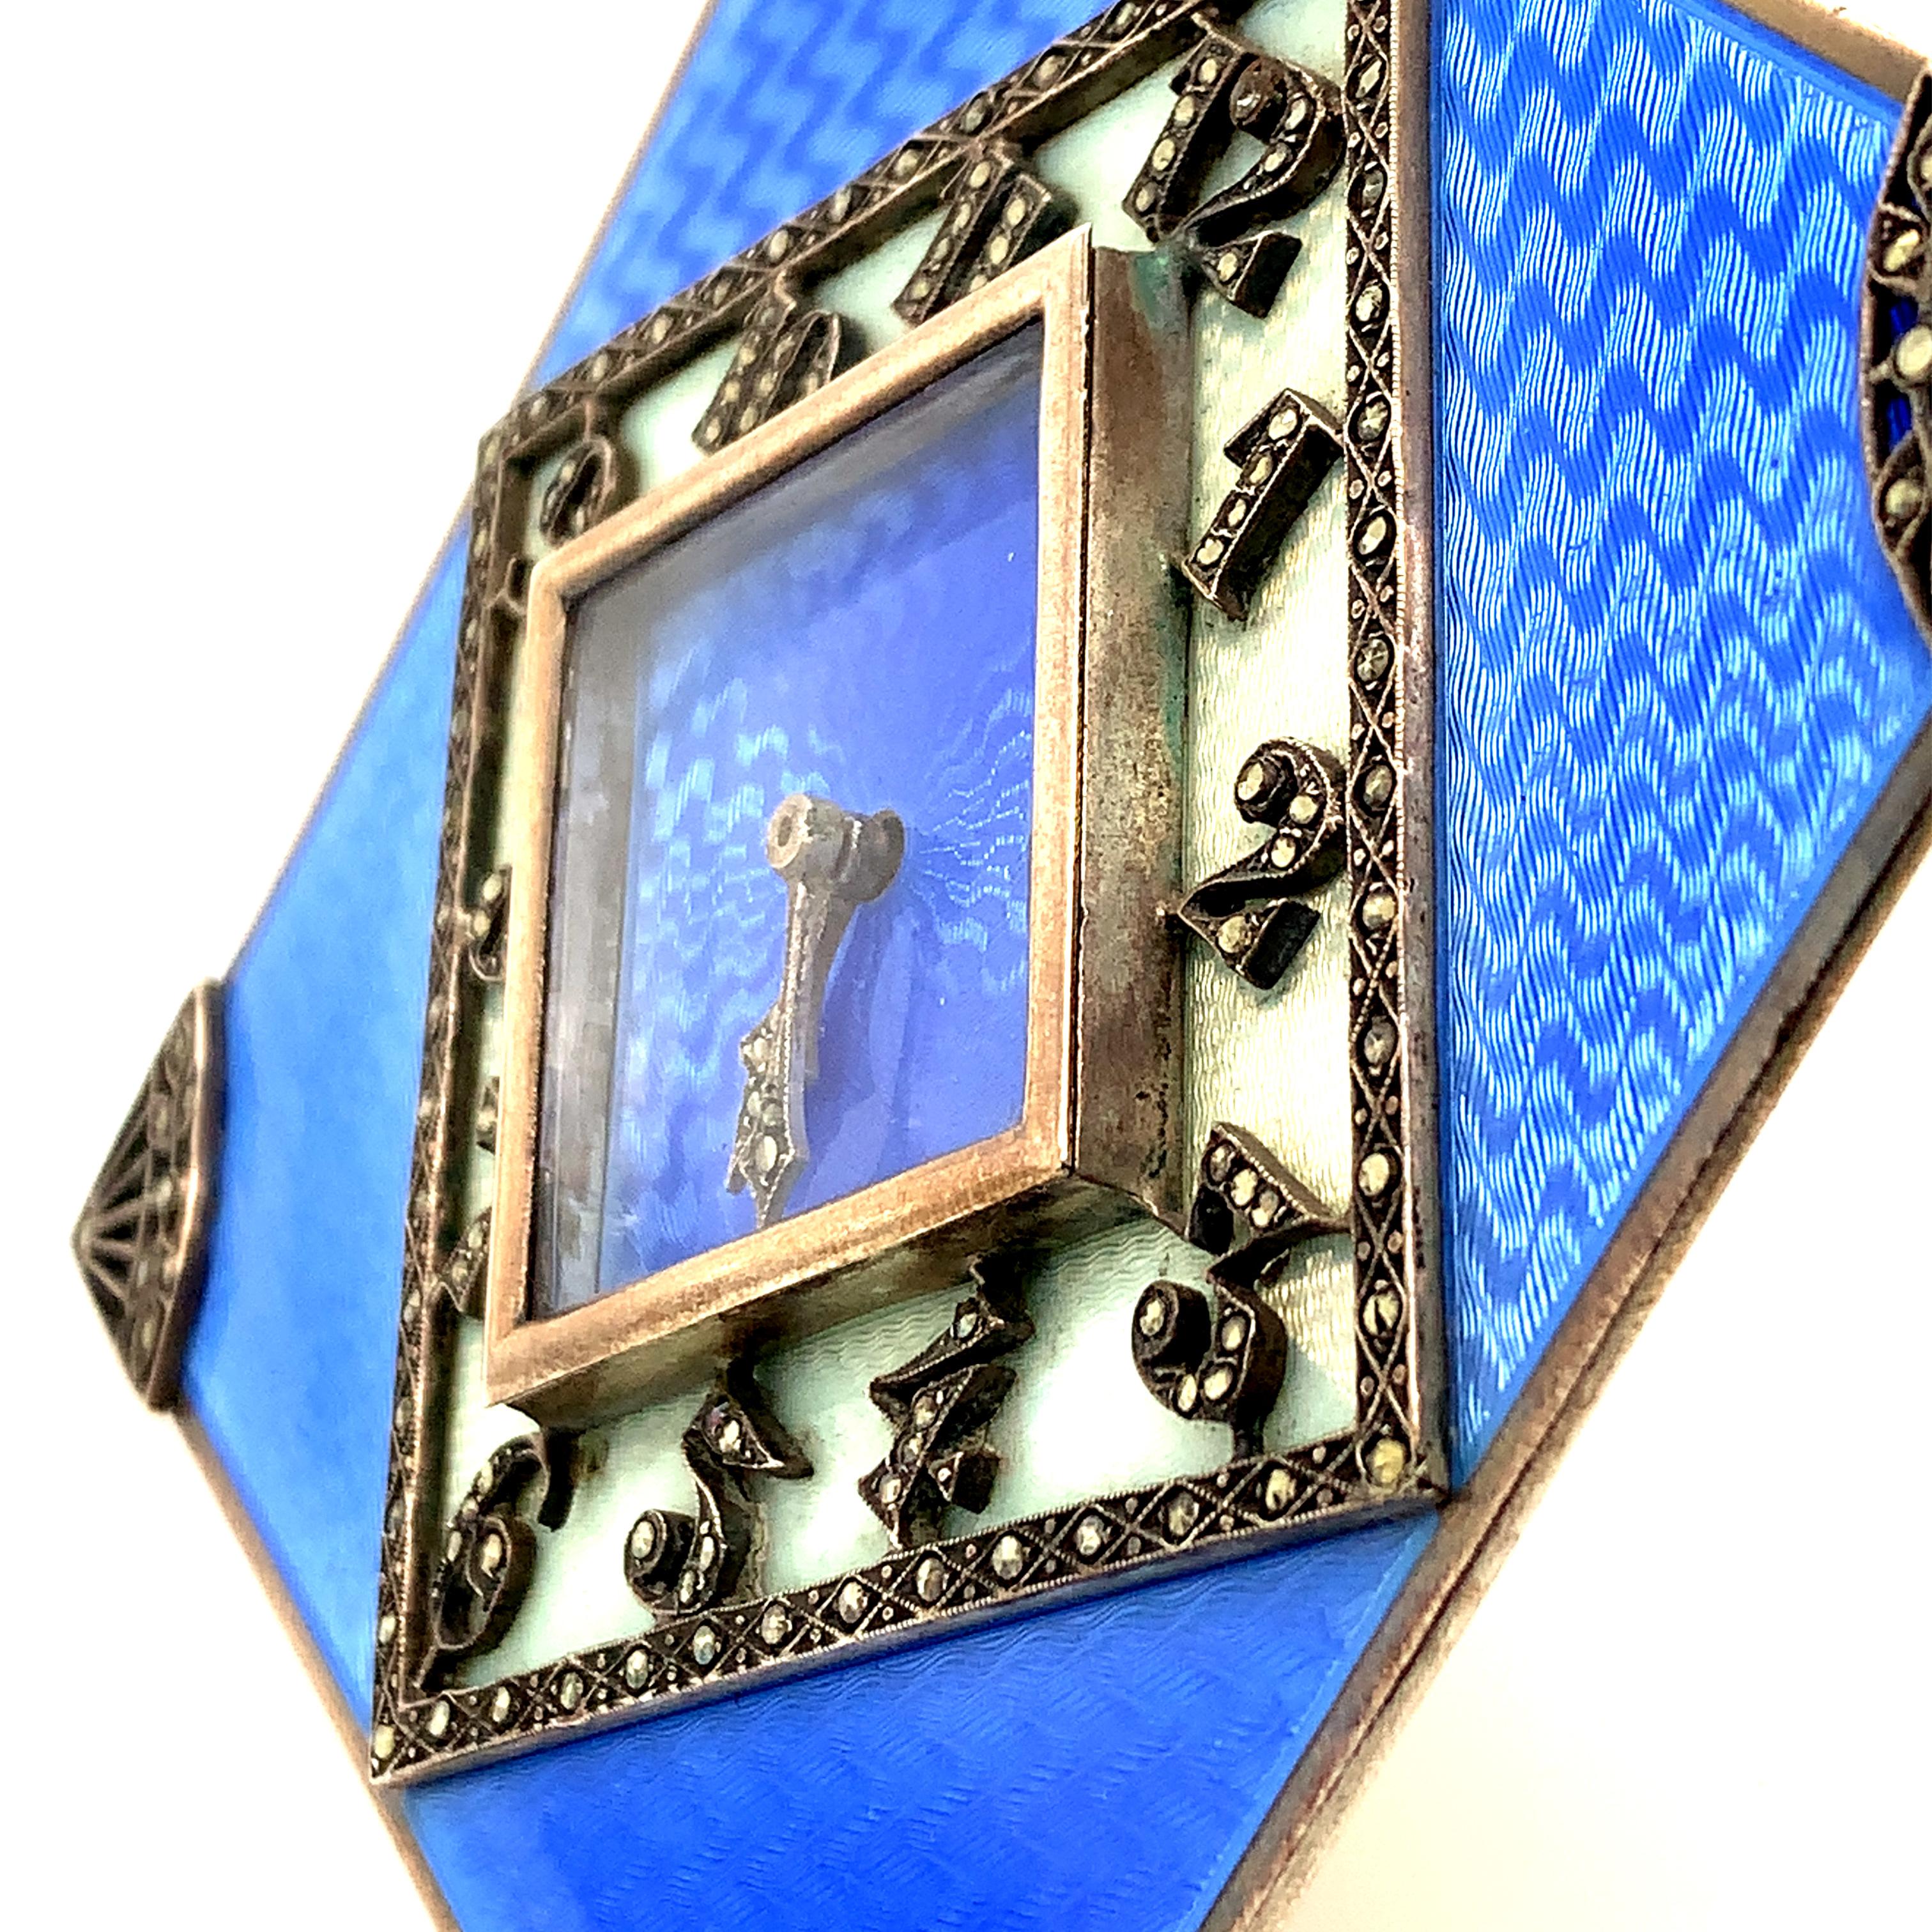 Exquisite art deco clock.  Sterling silver with brilliant blue guilloche enamel.  The diamond-shaped reserve in the center has marcasite numerals.  Applied sterling corners are also set with marcasites.  Mechanical works.  3